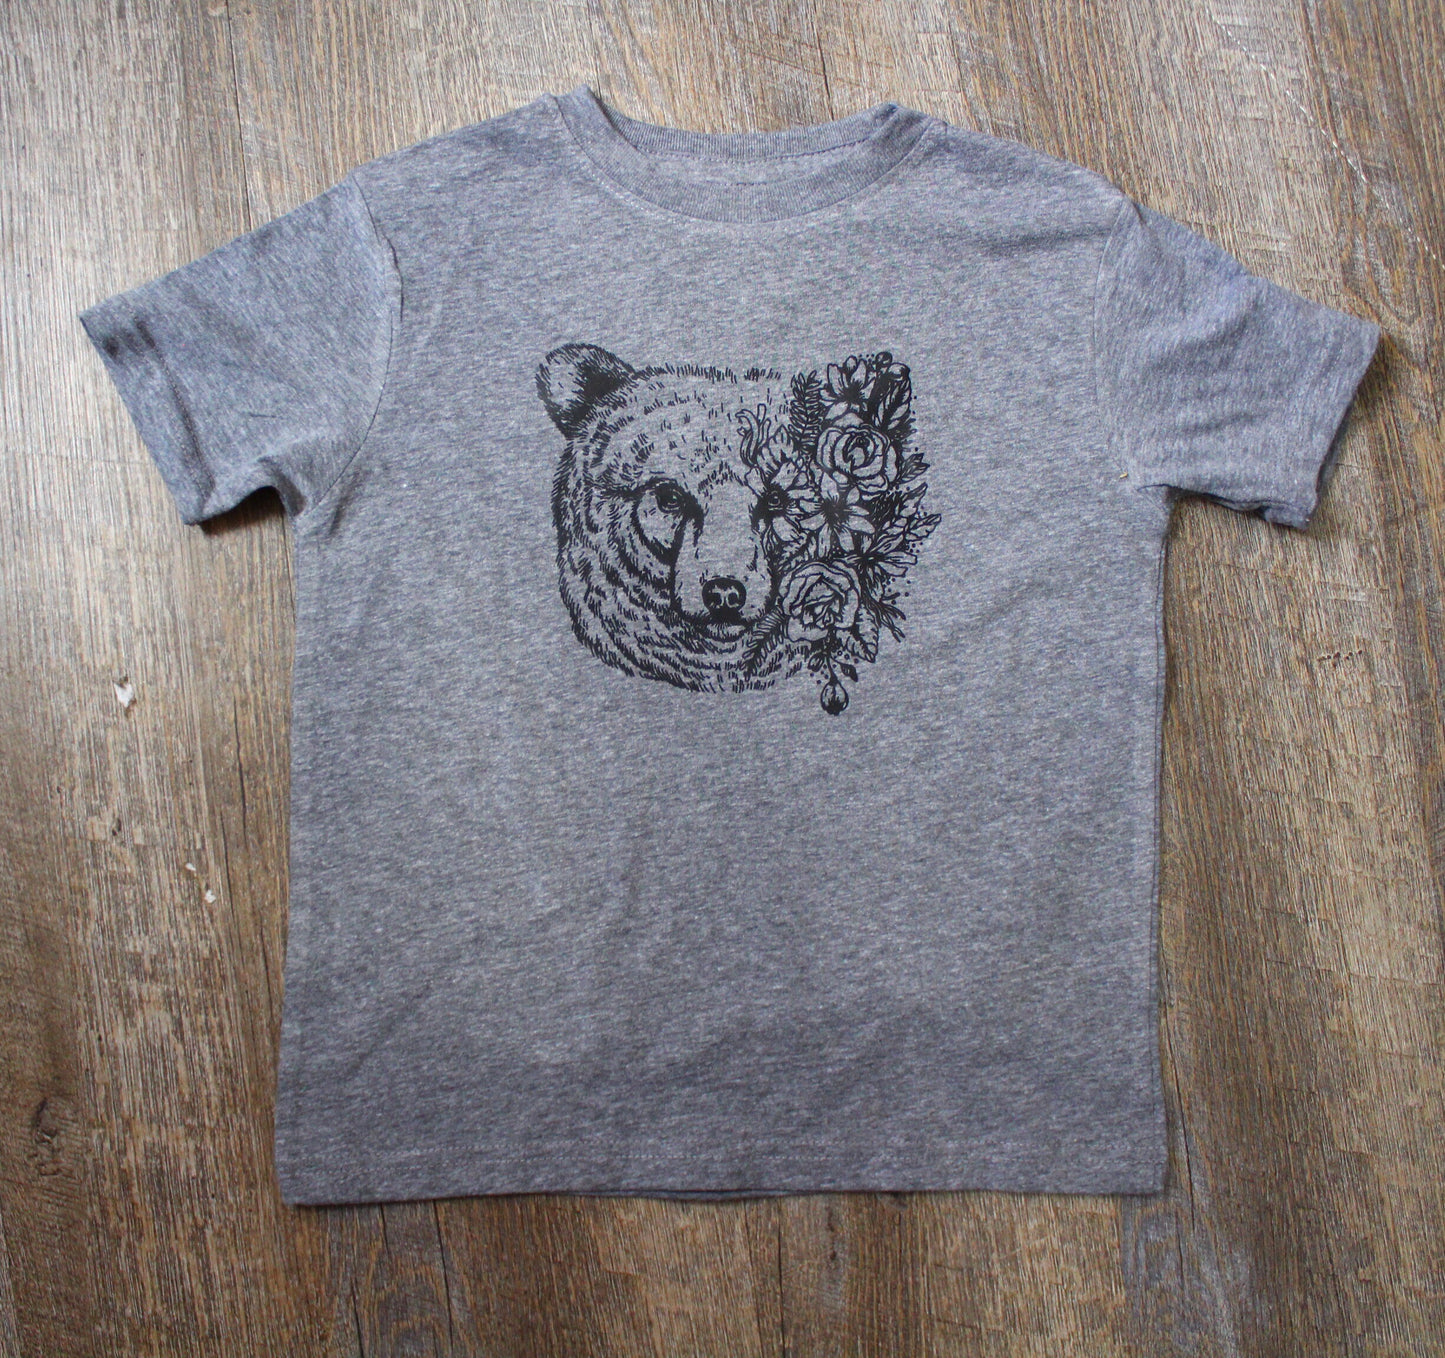 Bear floral graphic tee